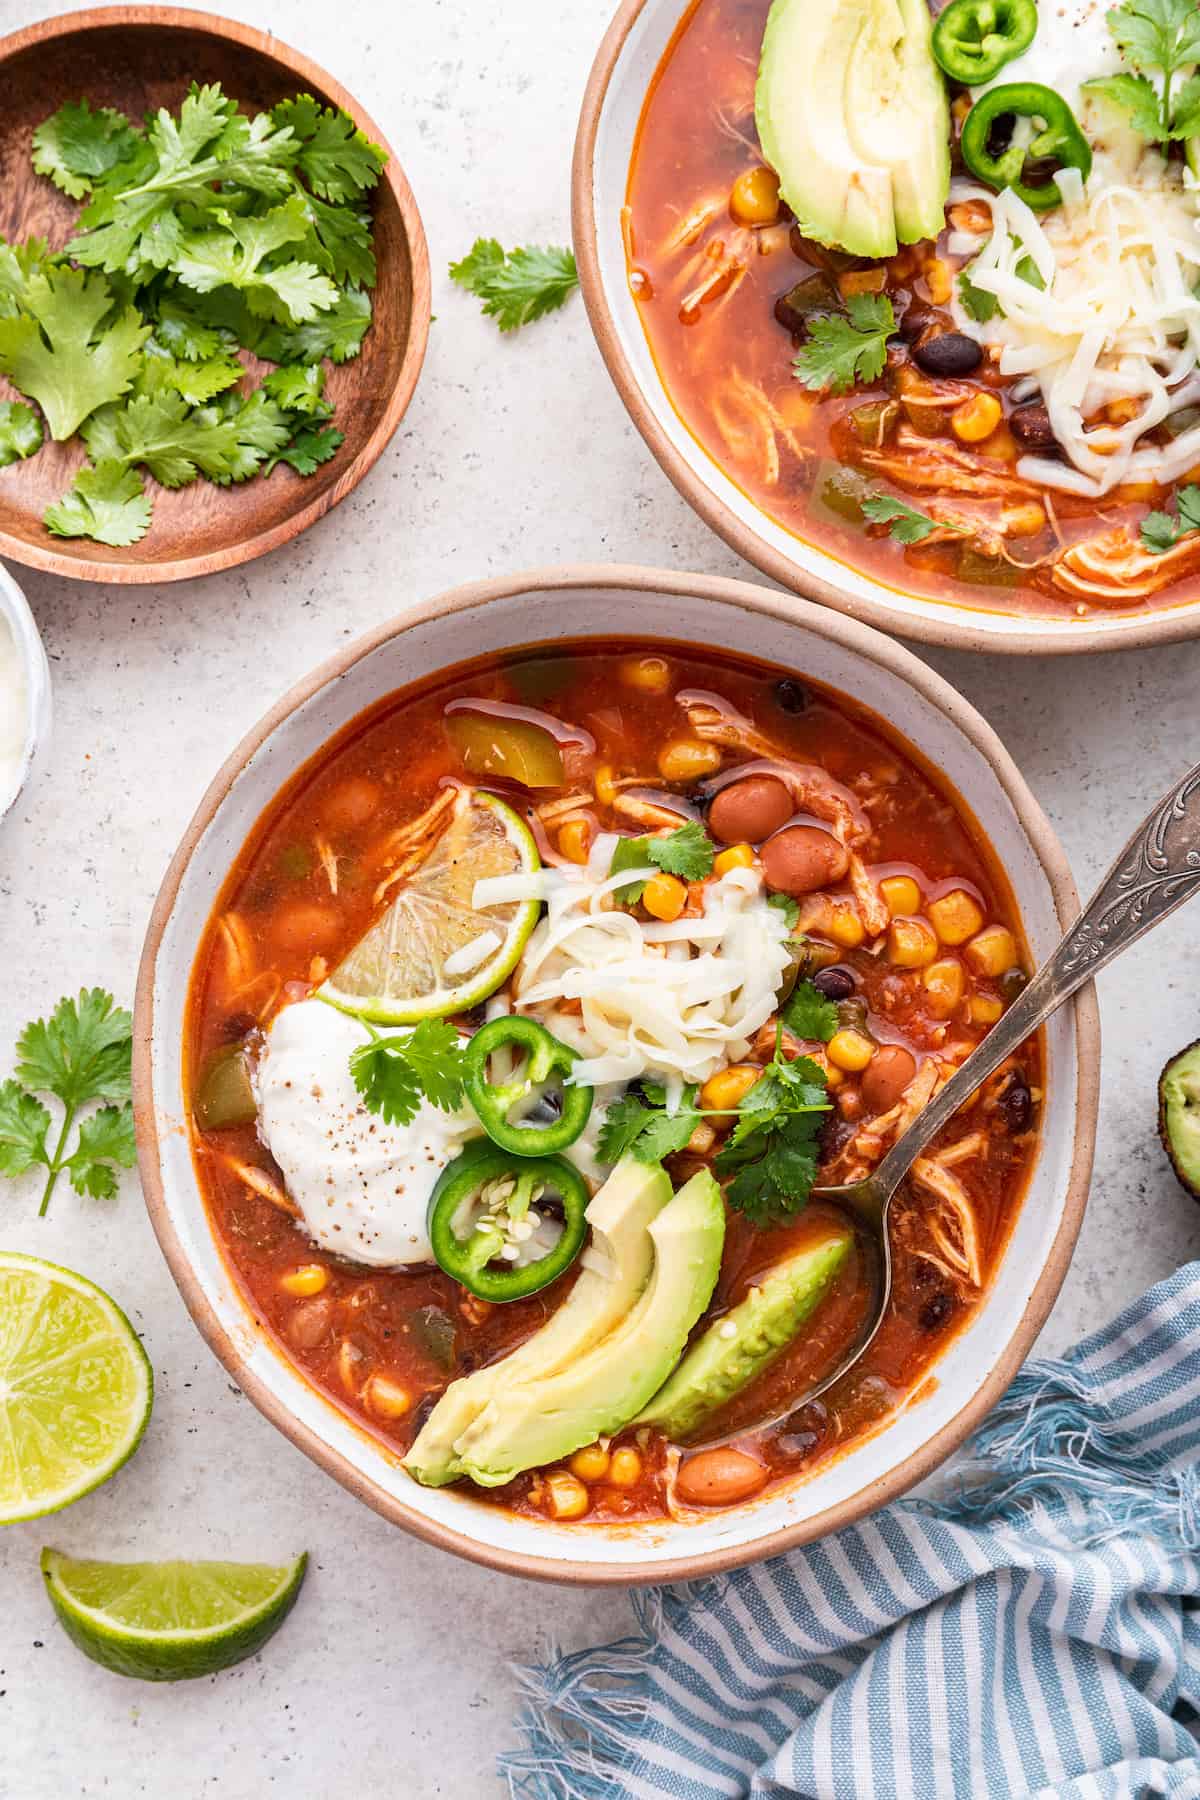 Two bowls of chicken taco soup with small bowl of cilantro leaves